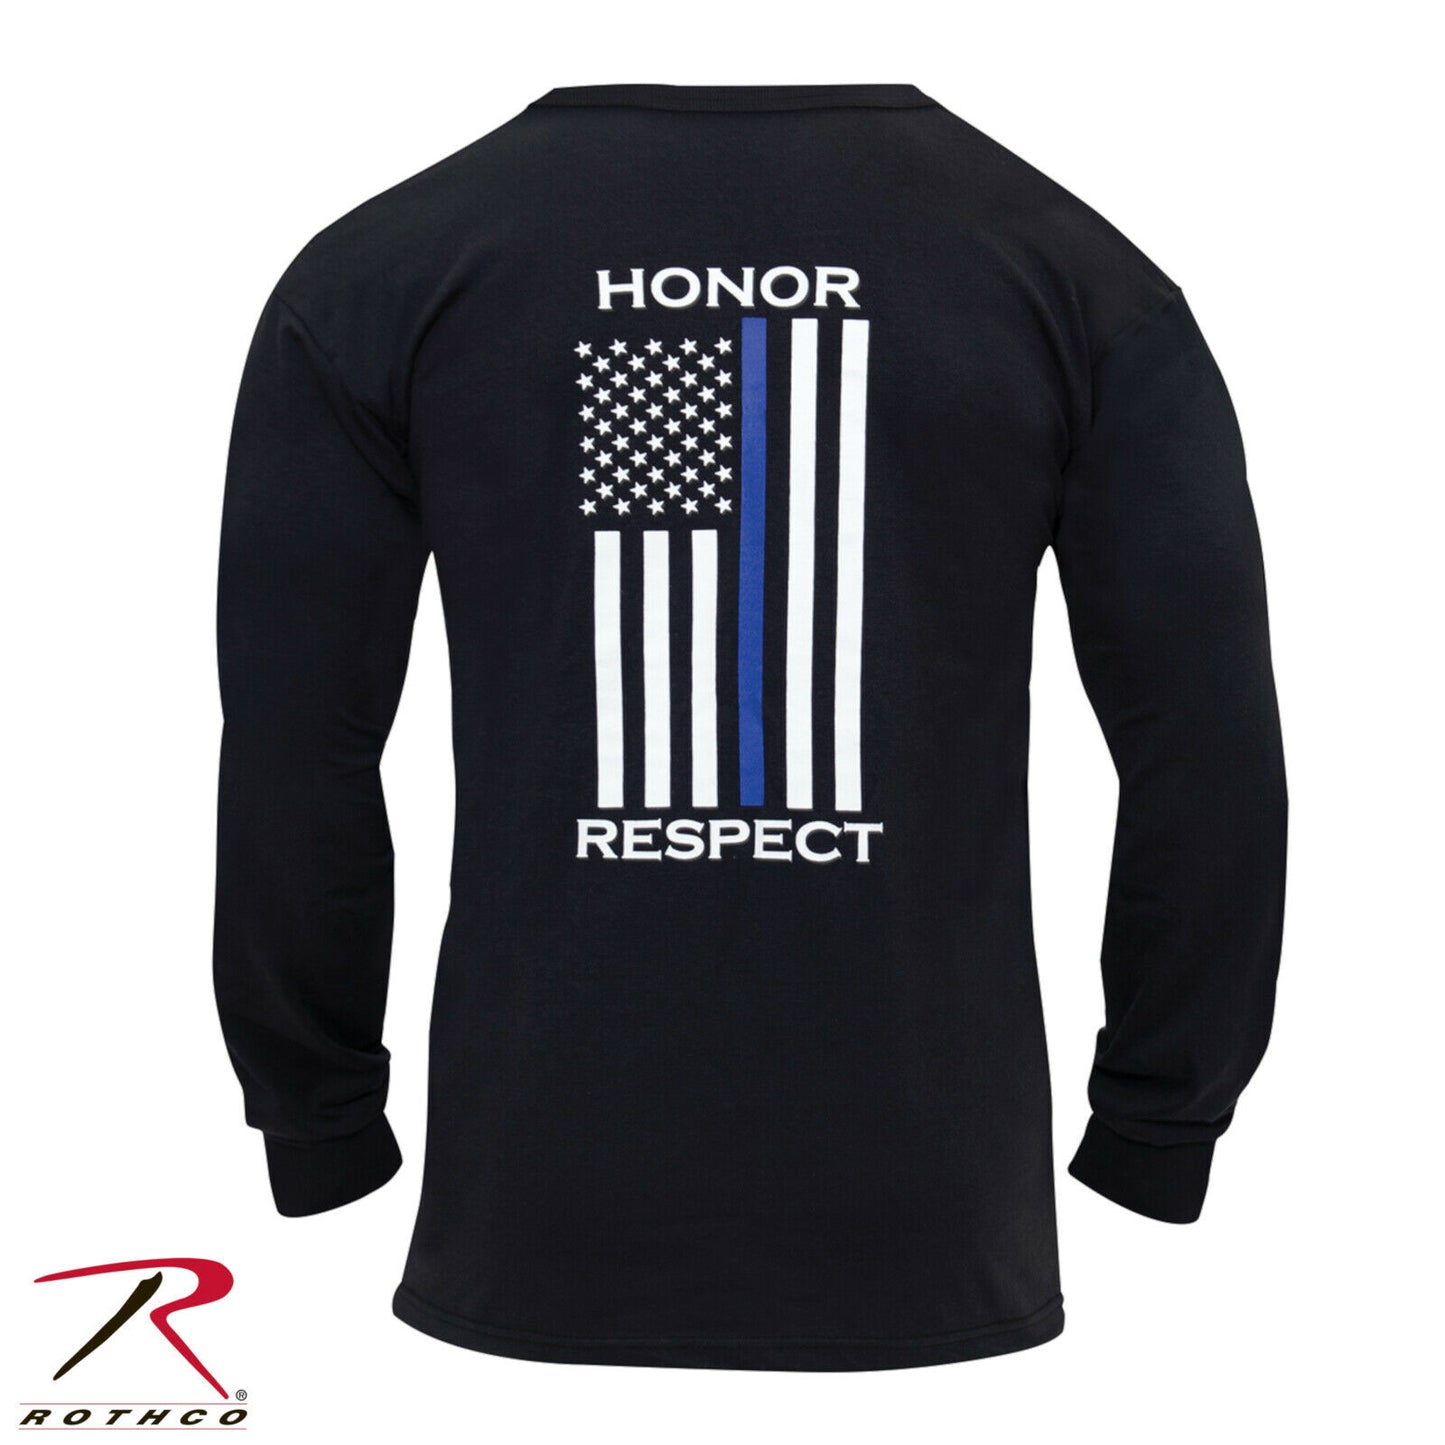 Rothco Thin Blue Line 'Honor and Respect' T-Shirt - Men's Black Long Sleeve Tee